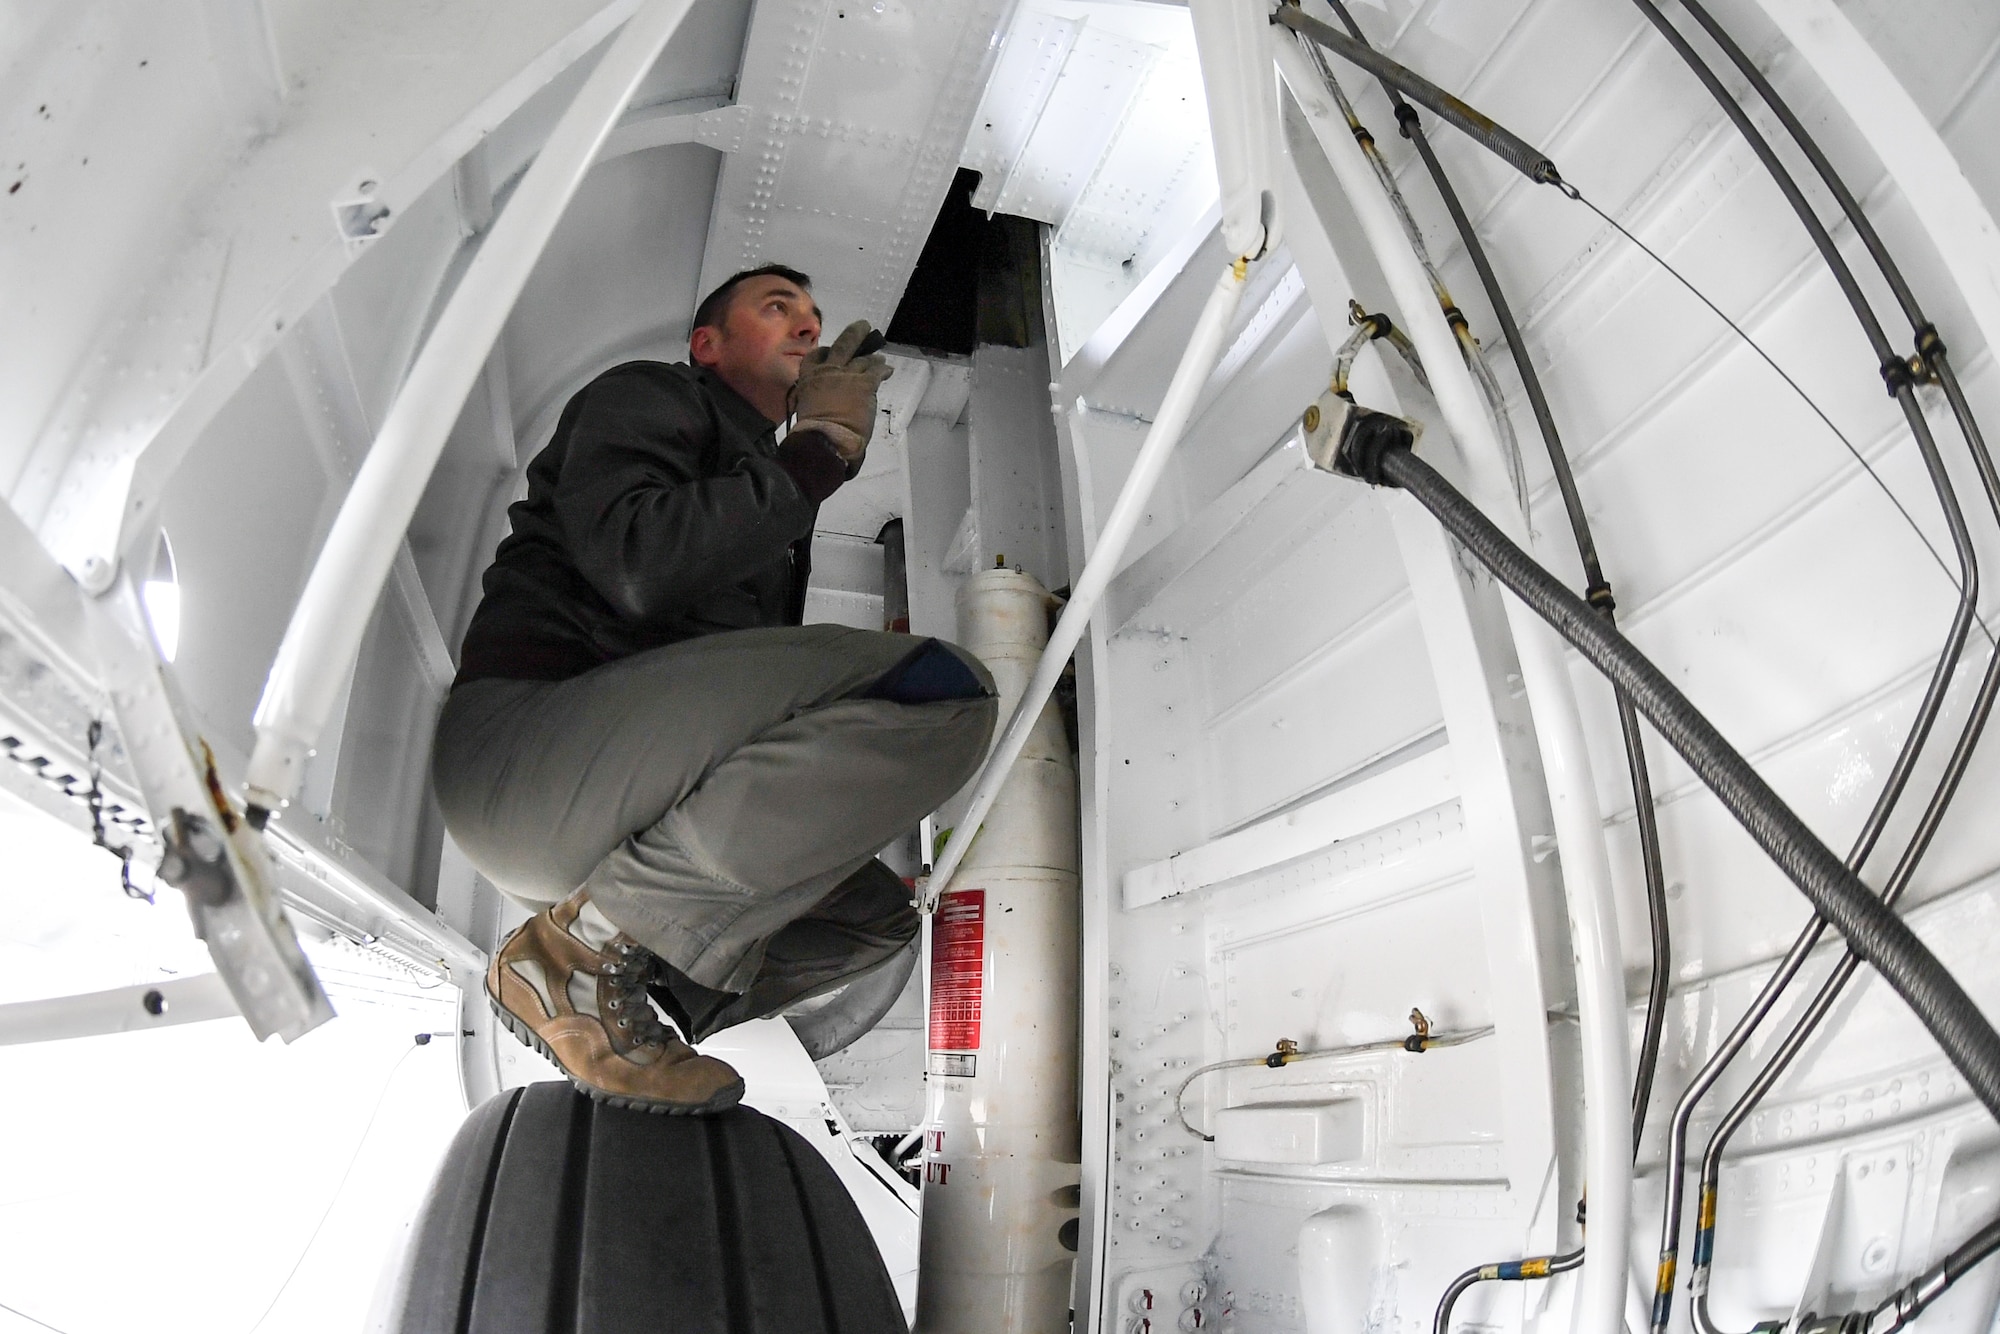 Master Sgt. Allen Clutter, a flight engineer attached to 514th Flight Test Squadron, inspects inside the wheel well while performing a pre-flight functional flight check on a U.S. Navy C-130 Hercules April 11, 2019, at Hill Air Force Base, Utah. (U.S. Air Force photo by Cynthia Griggs)